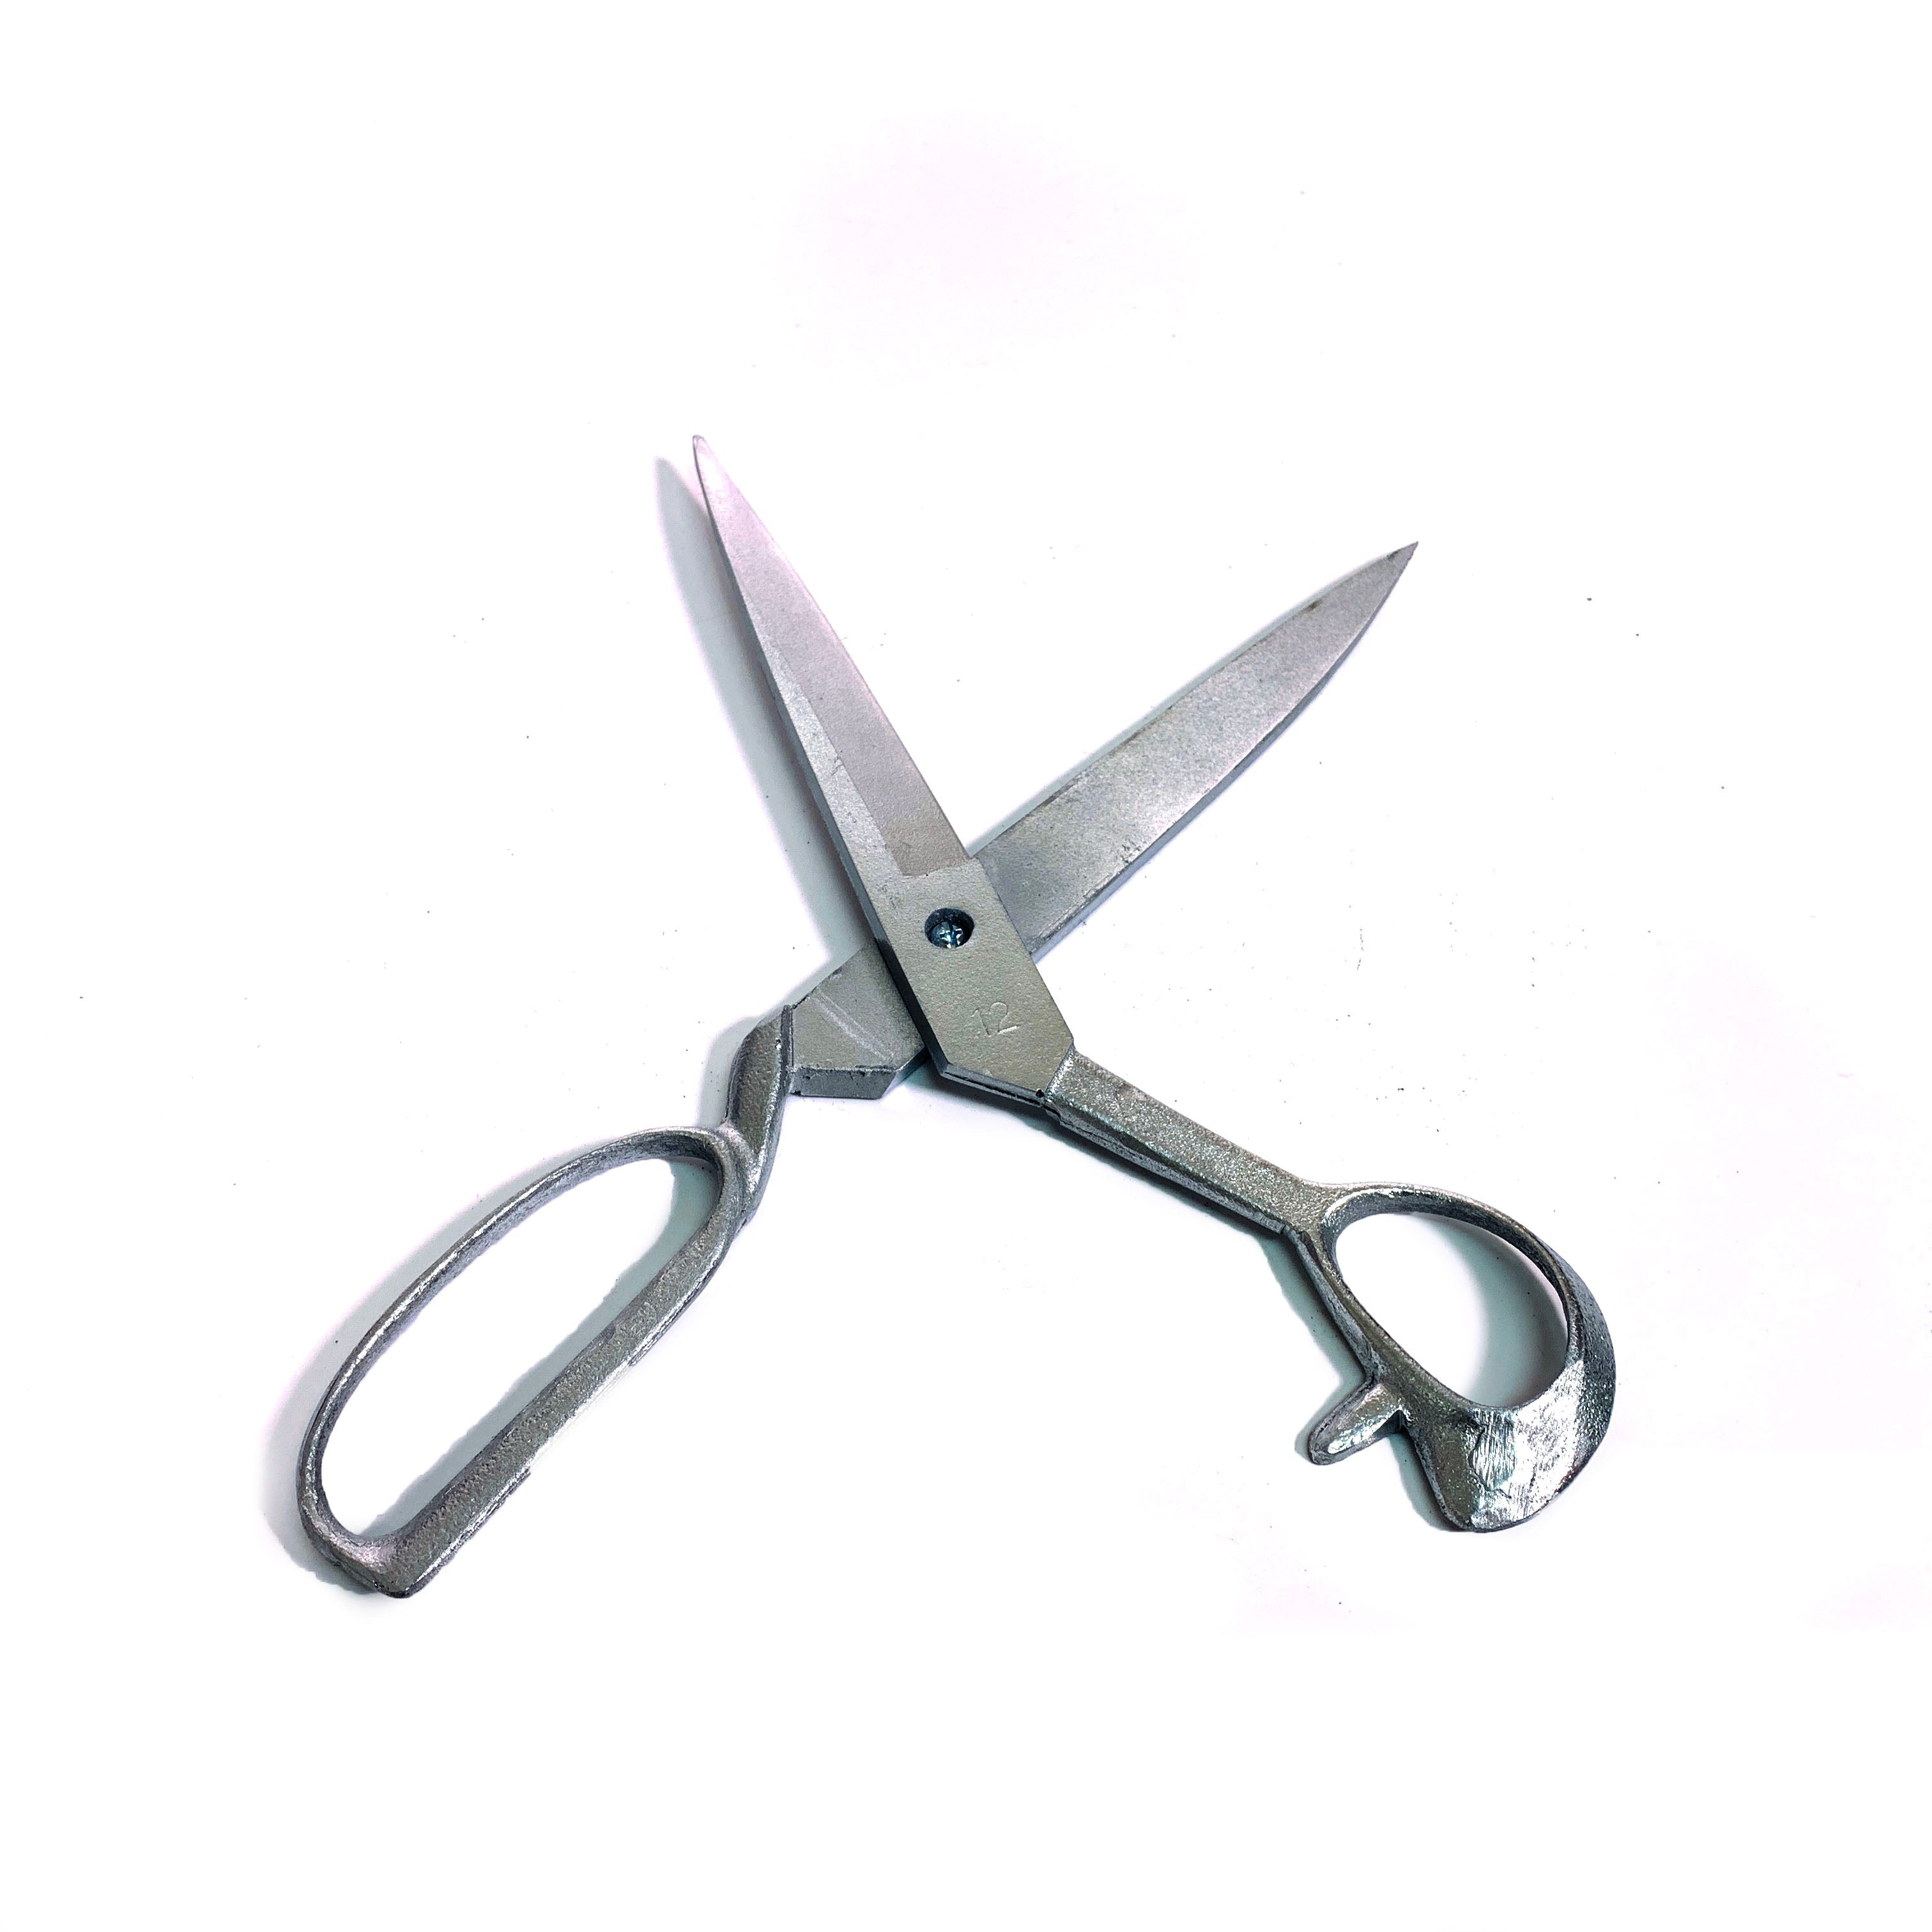 Multifunctional Stainless Steel Beauty Scissors For Eyebrow Scissors And  Sewing Household Hand Tool From Abouts, $0.74